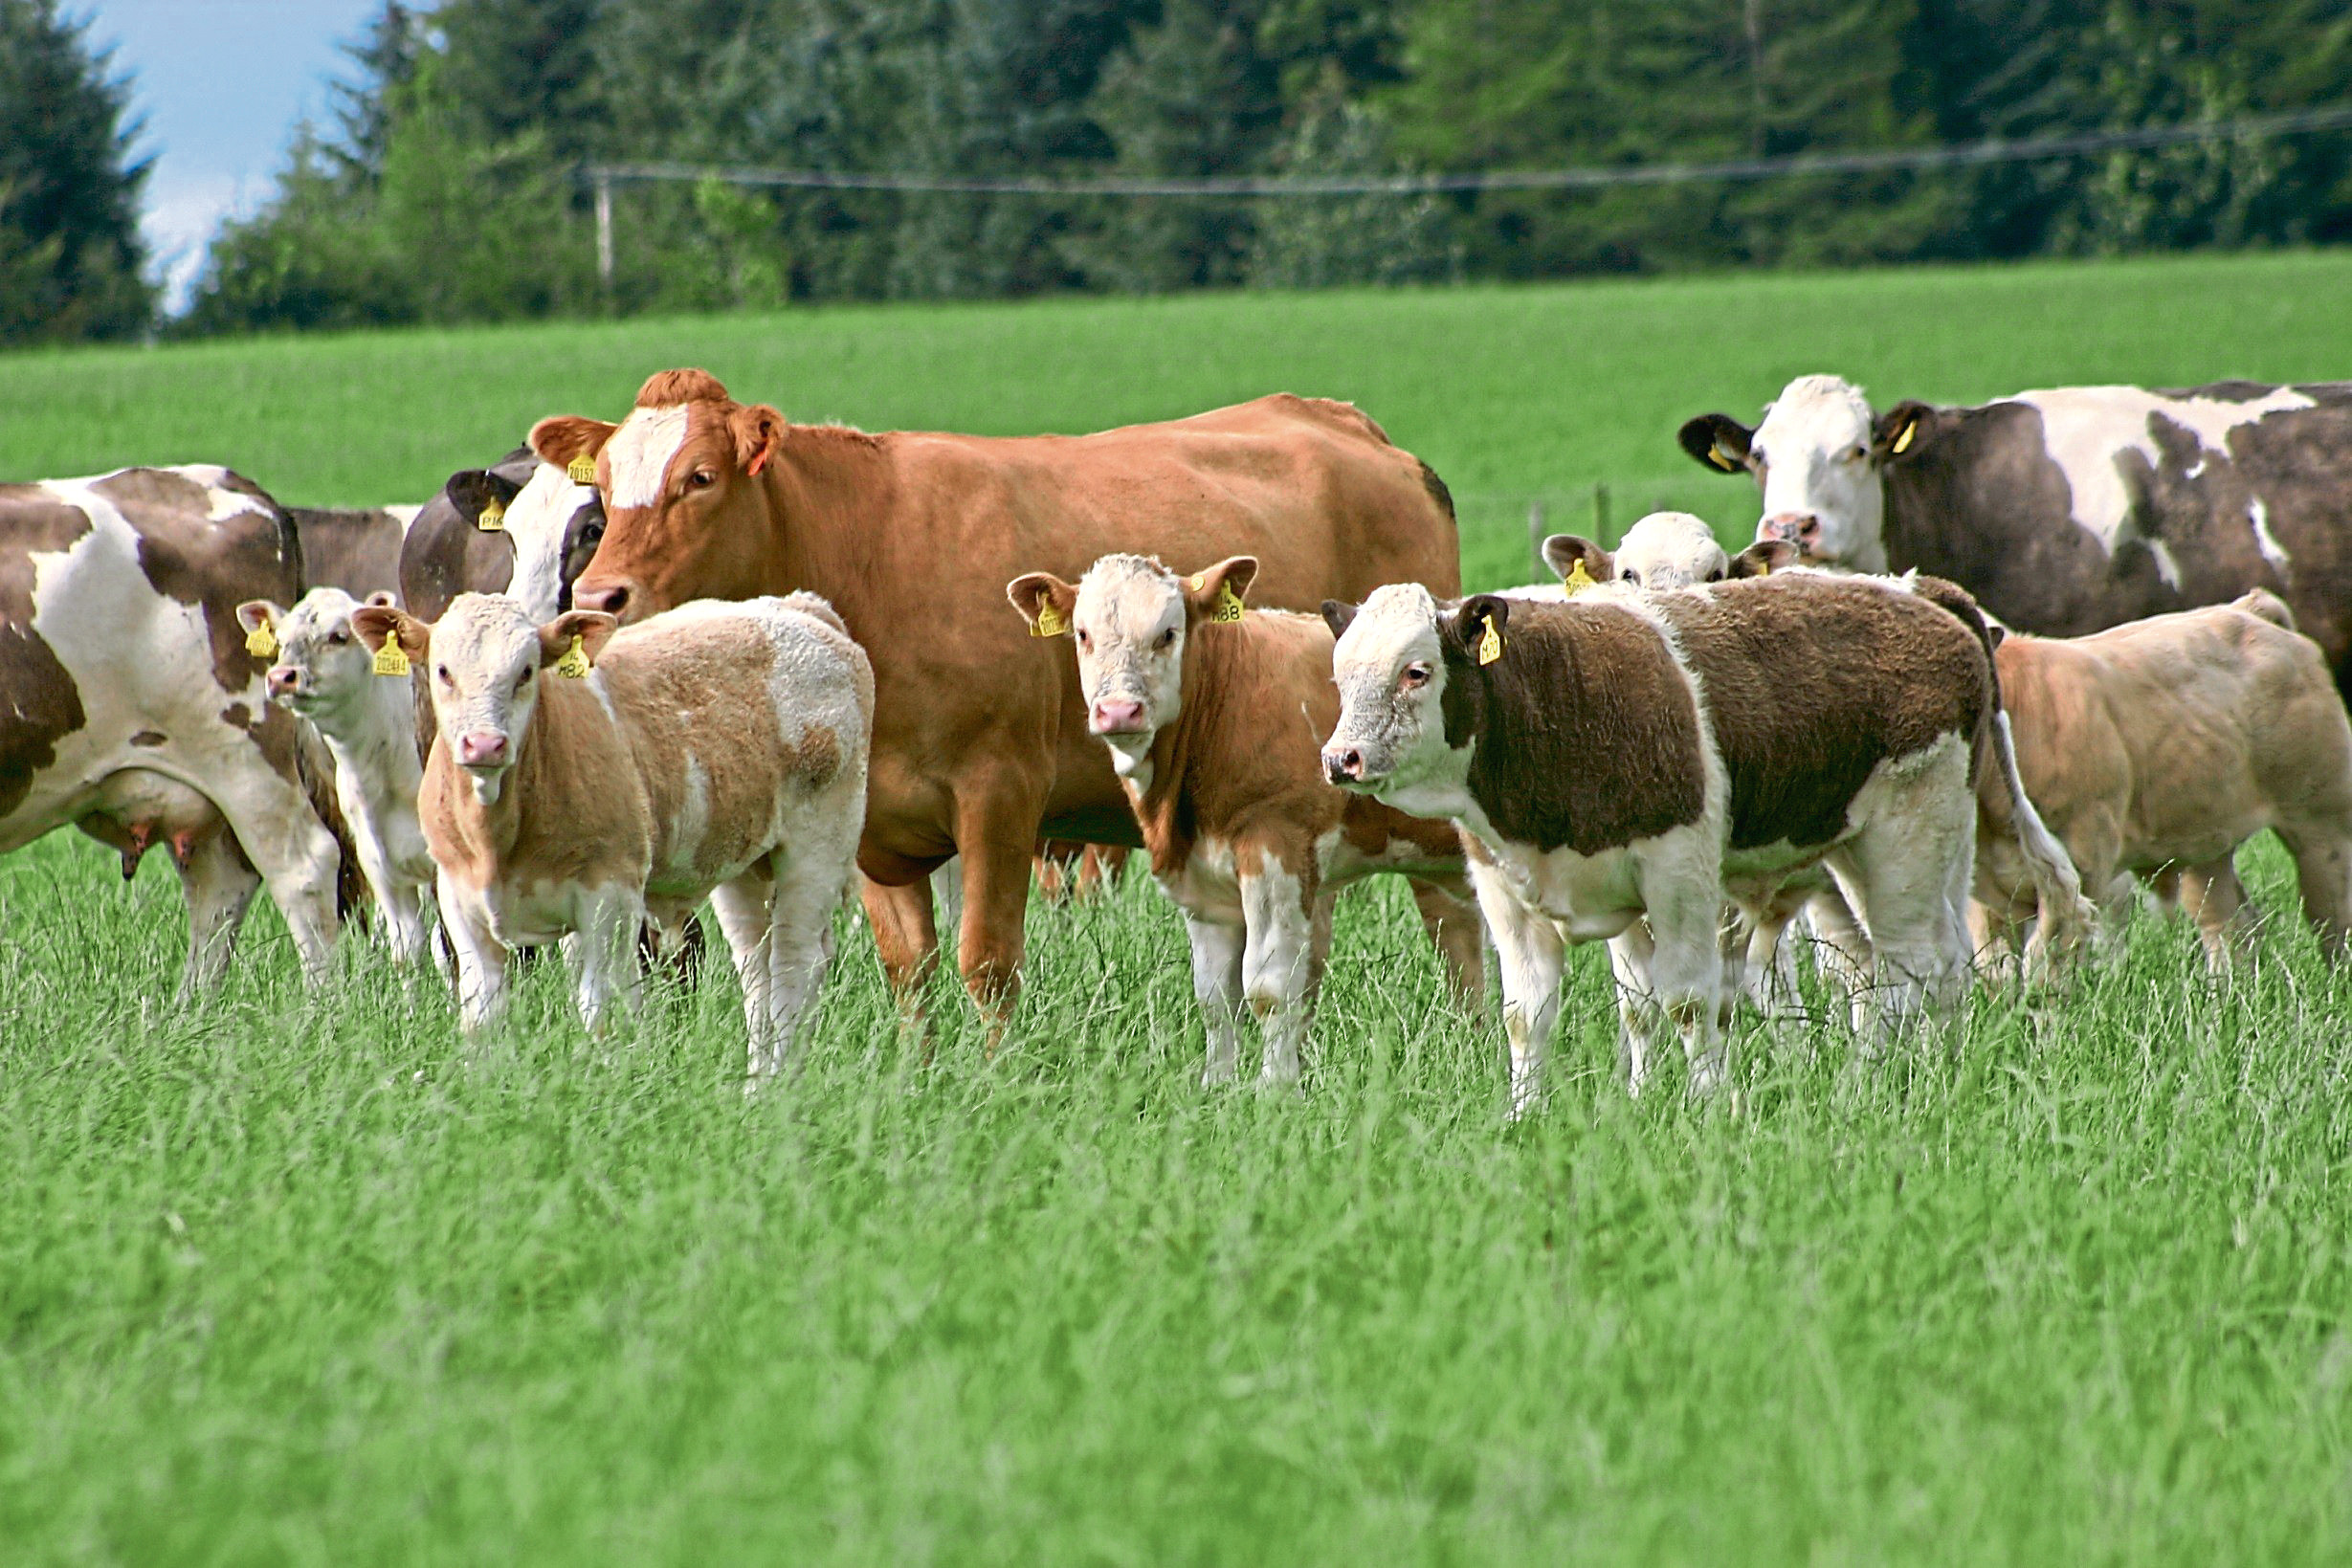 Cattle numbers continued their long-term decline.